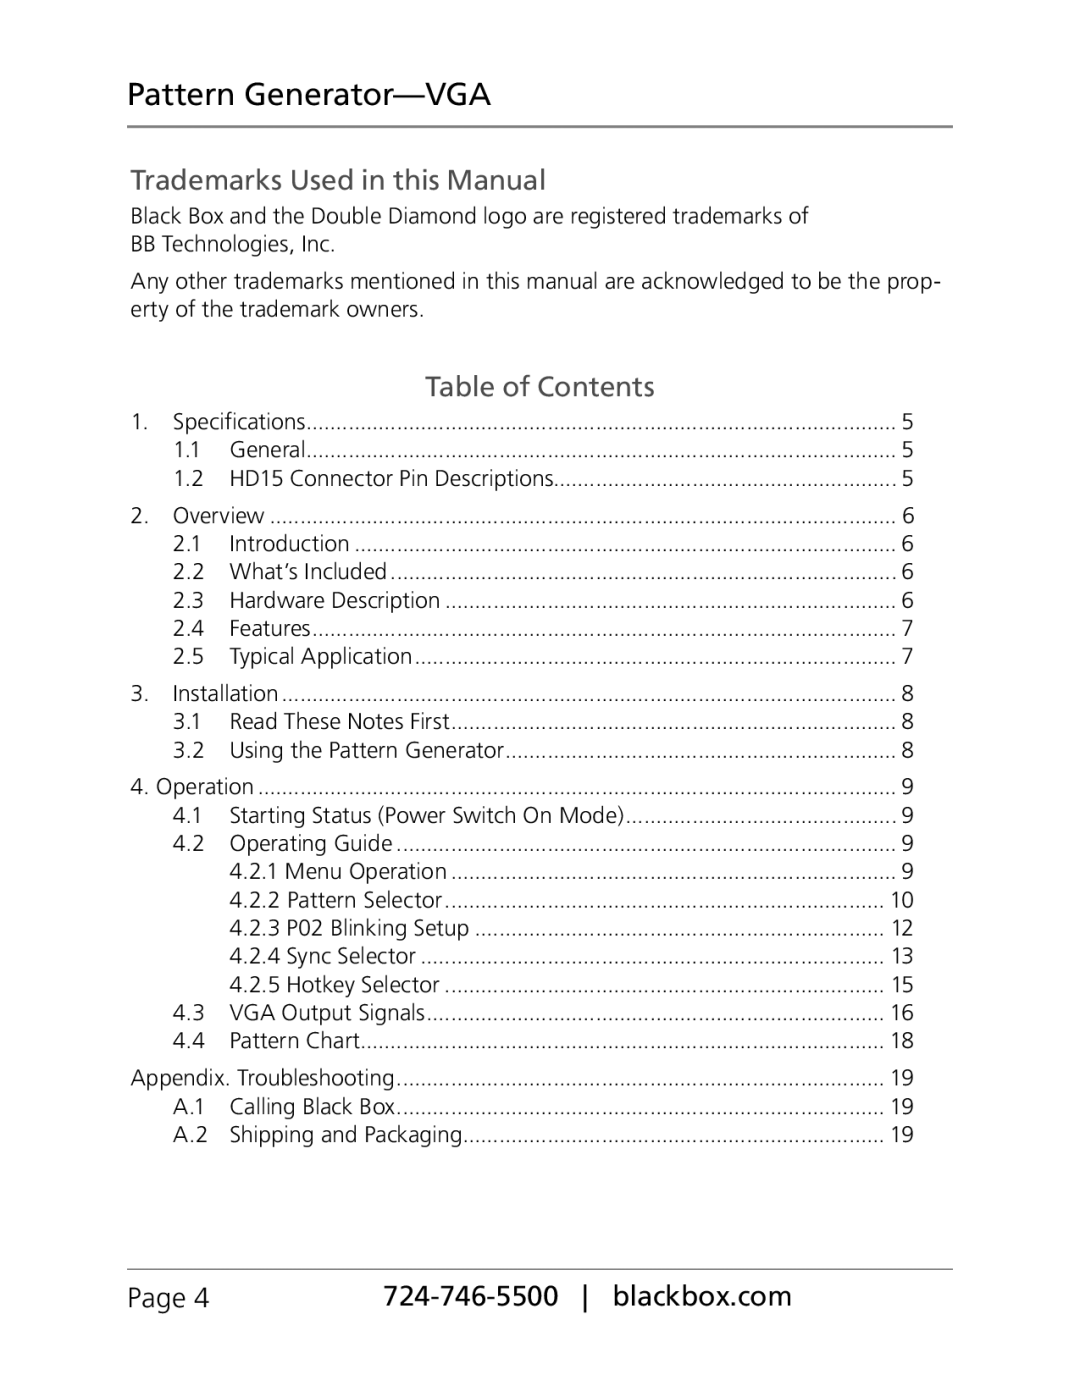 Black Box PG-VGA manual Trademarks Used in this Manual, Table of Contents, Pattern Generator-VGA, Page 